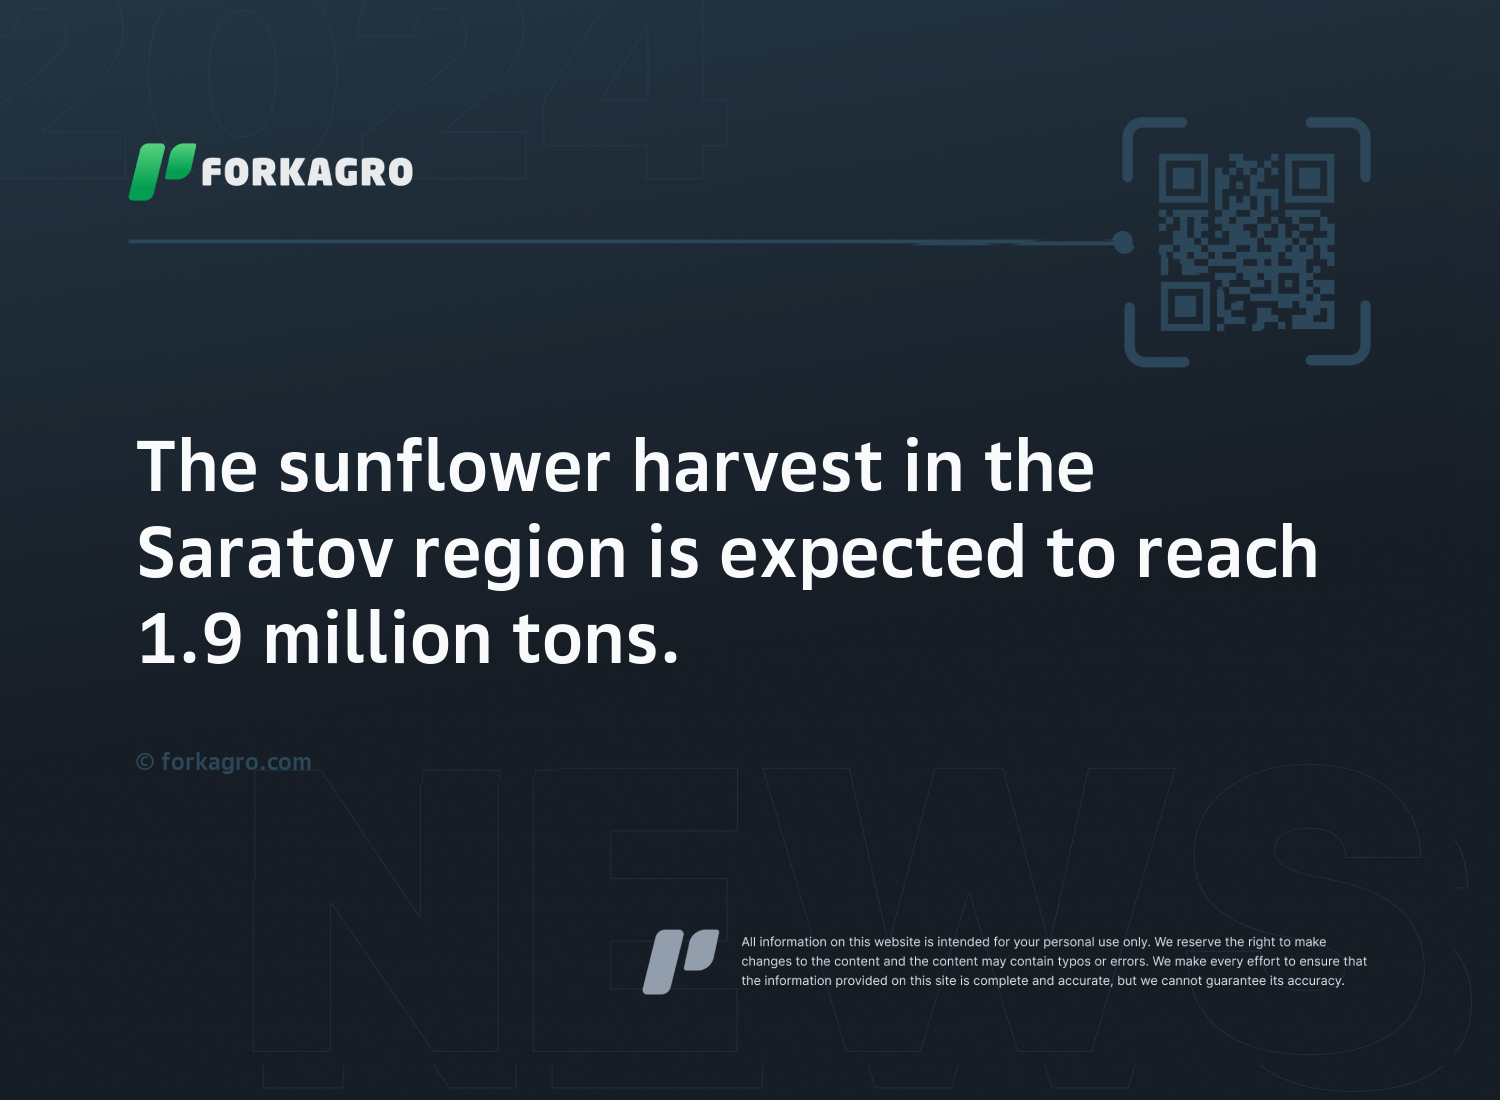 The sunflower harvest in the Saratov region is expected to reach 1.9 million tons.